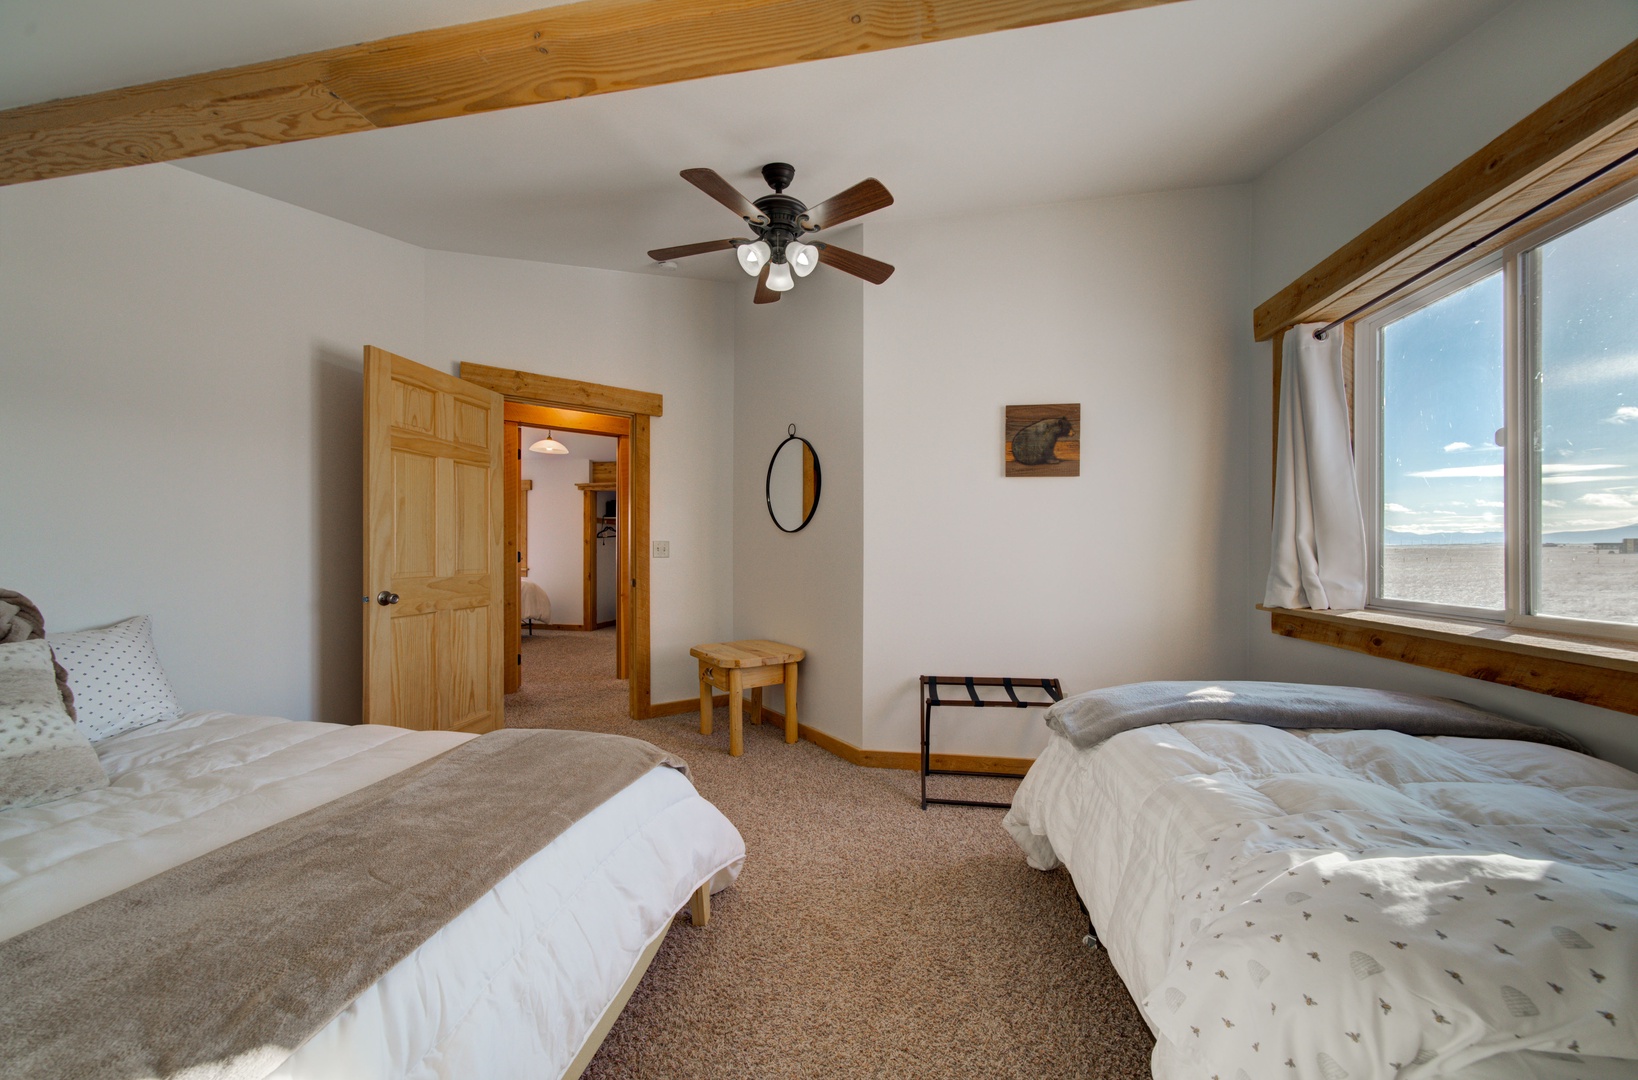 Livingston Vacation Rentals, OFB Sunset Grove - This room shares a guest bathroom with the other guest room